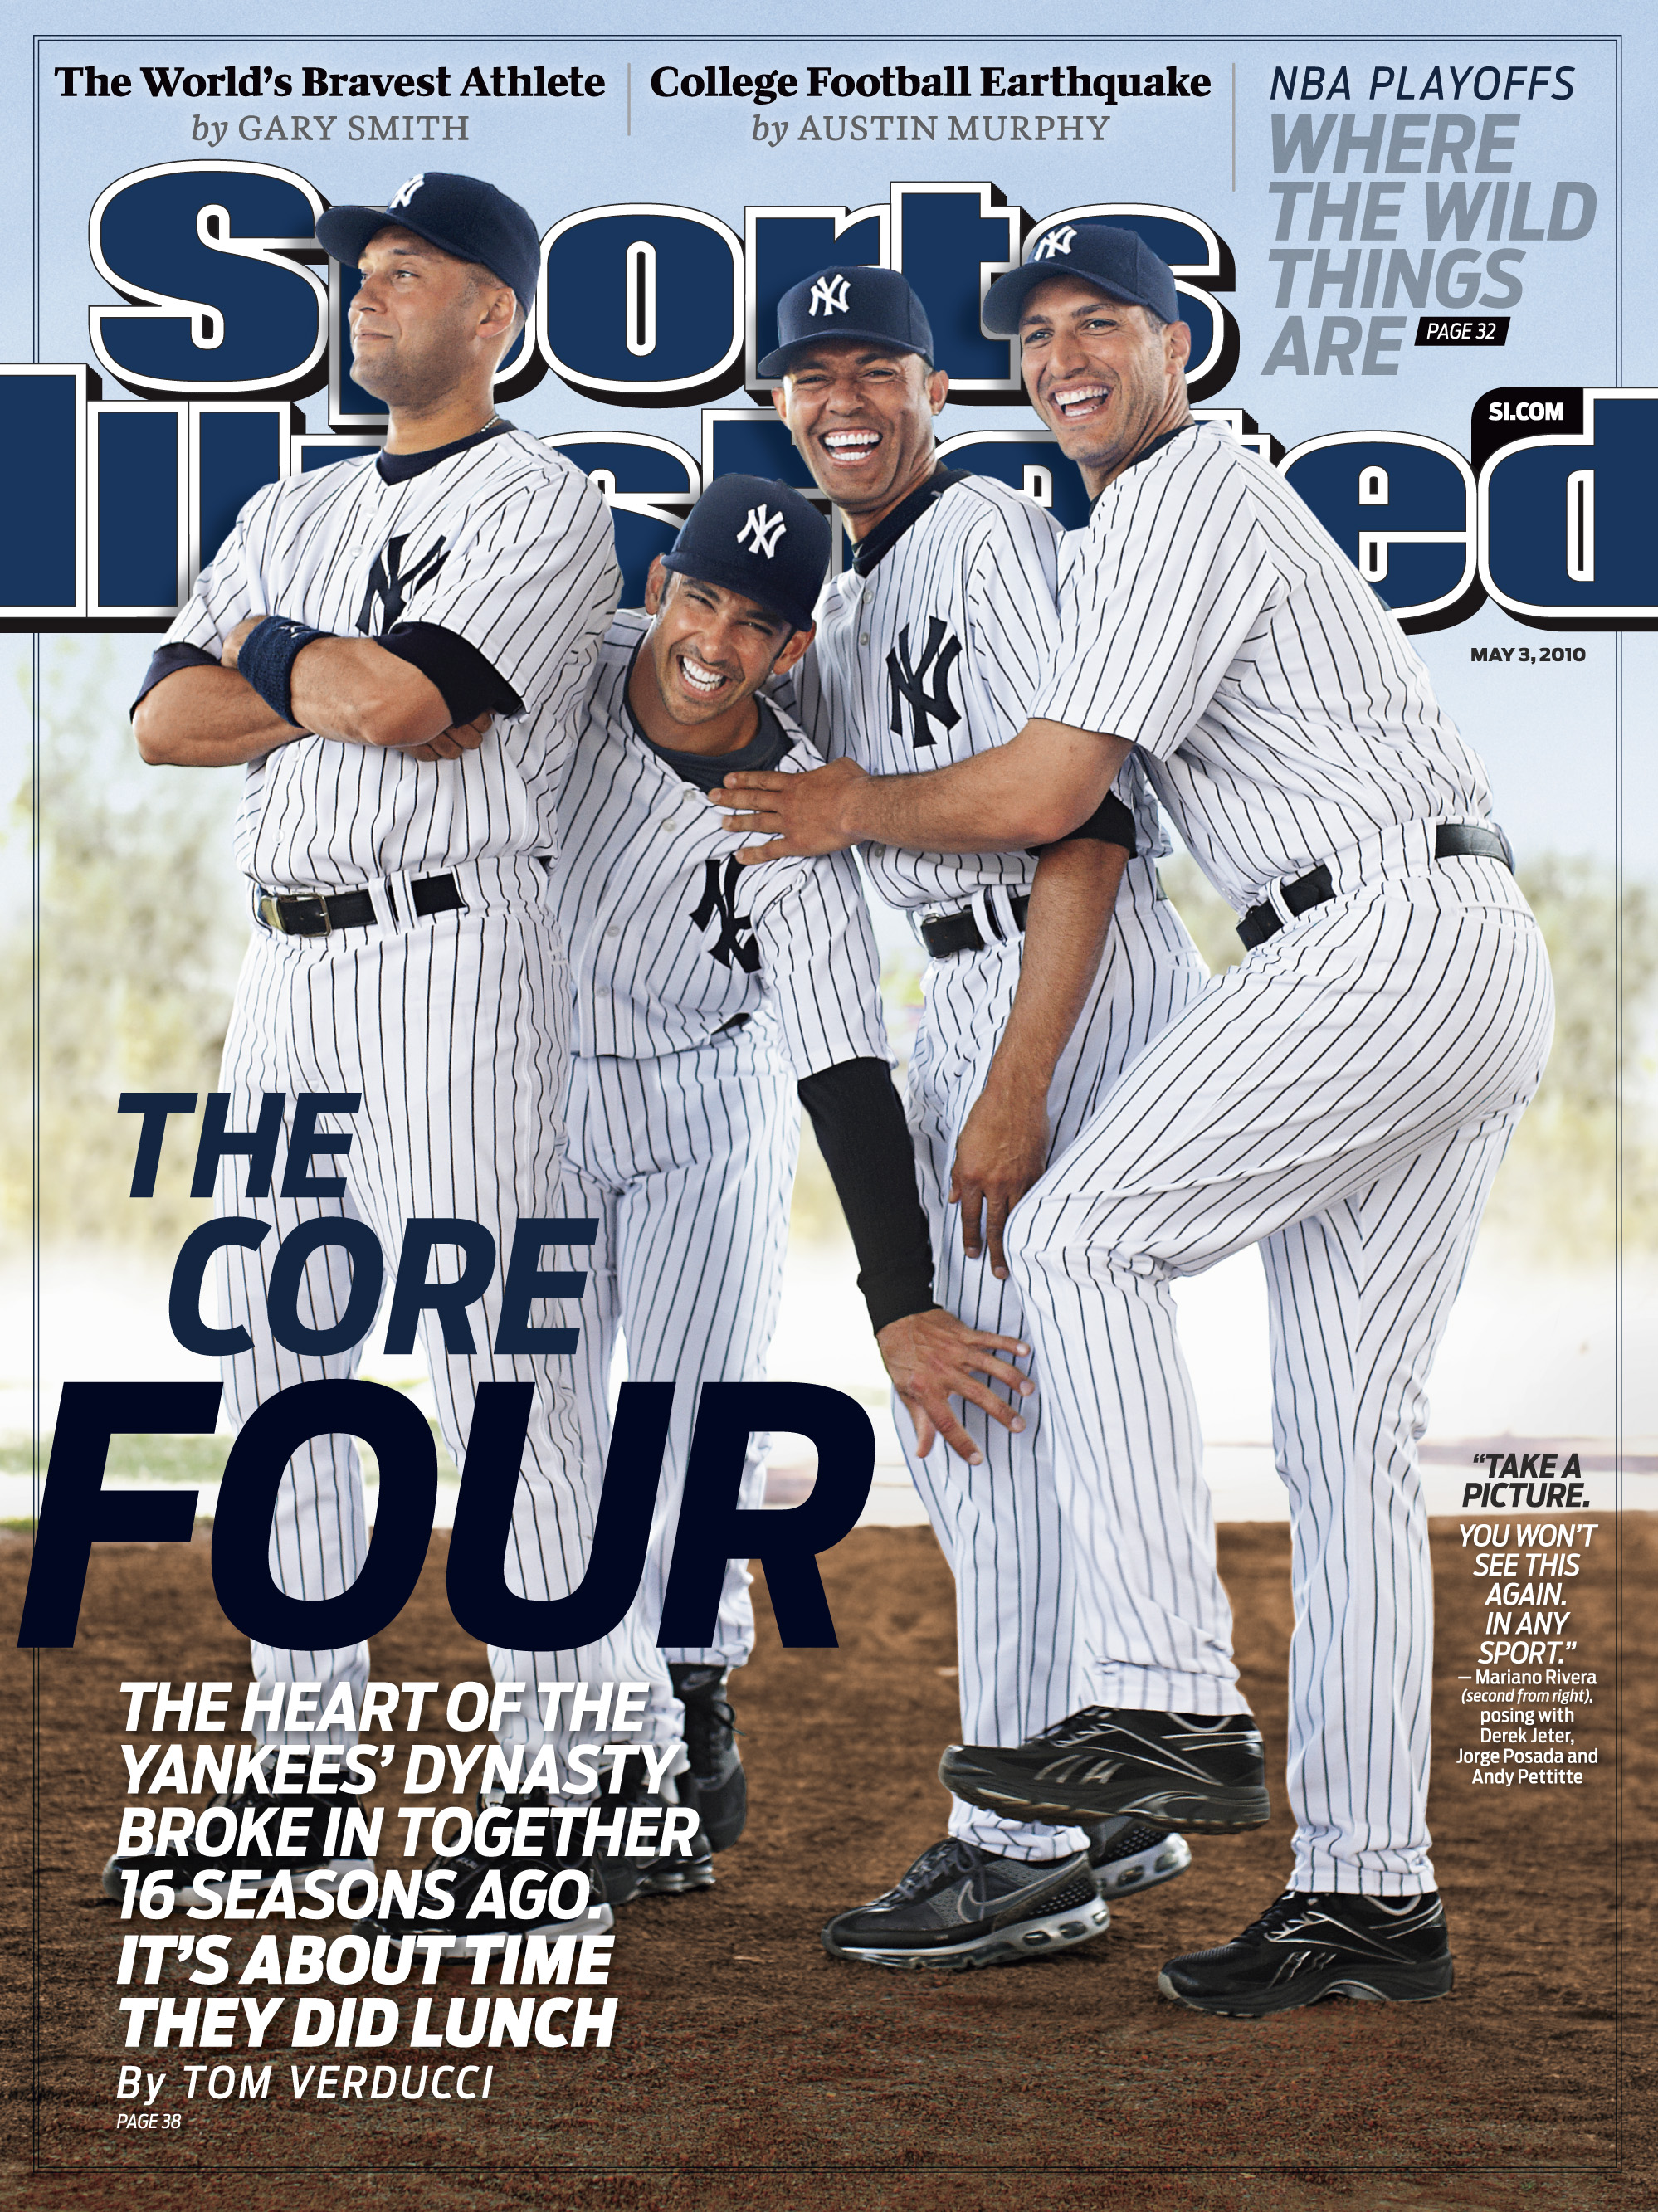 Derek Jeter, Core Four at Yankees' Old Timers' Day